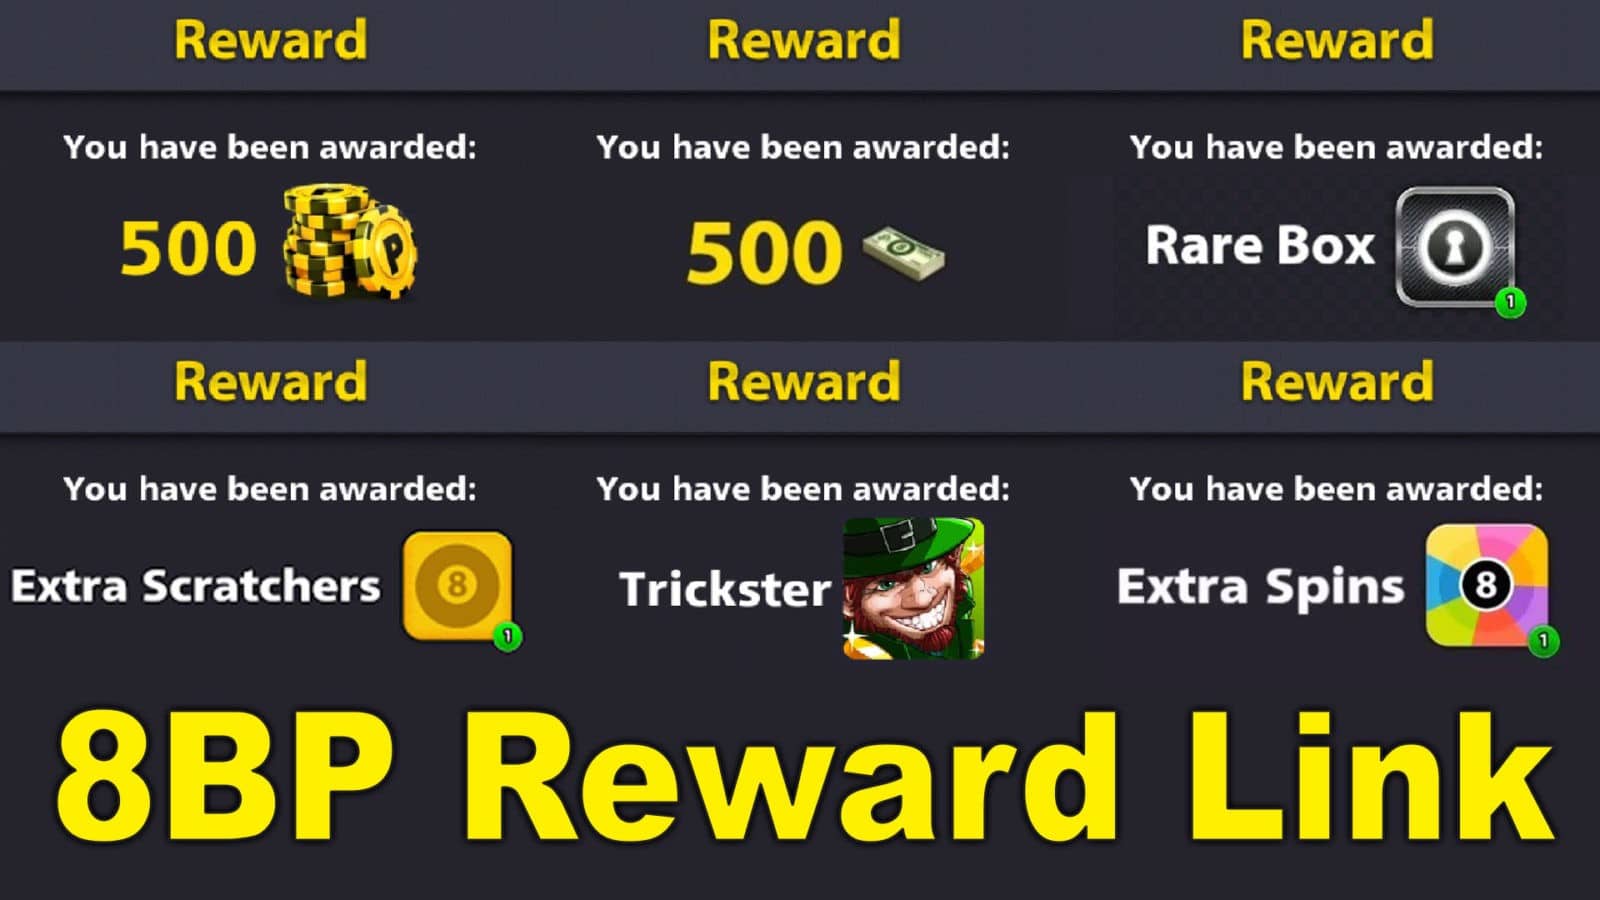 8 Ball Pool Free Coin, Cue & Cash Reward Link (Updated Today)